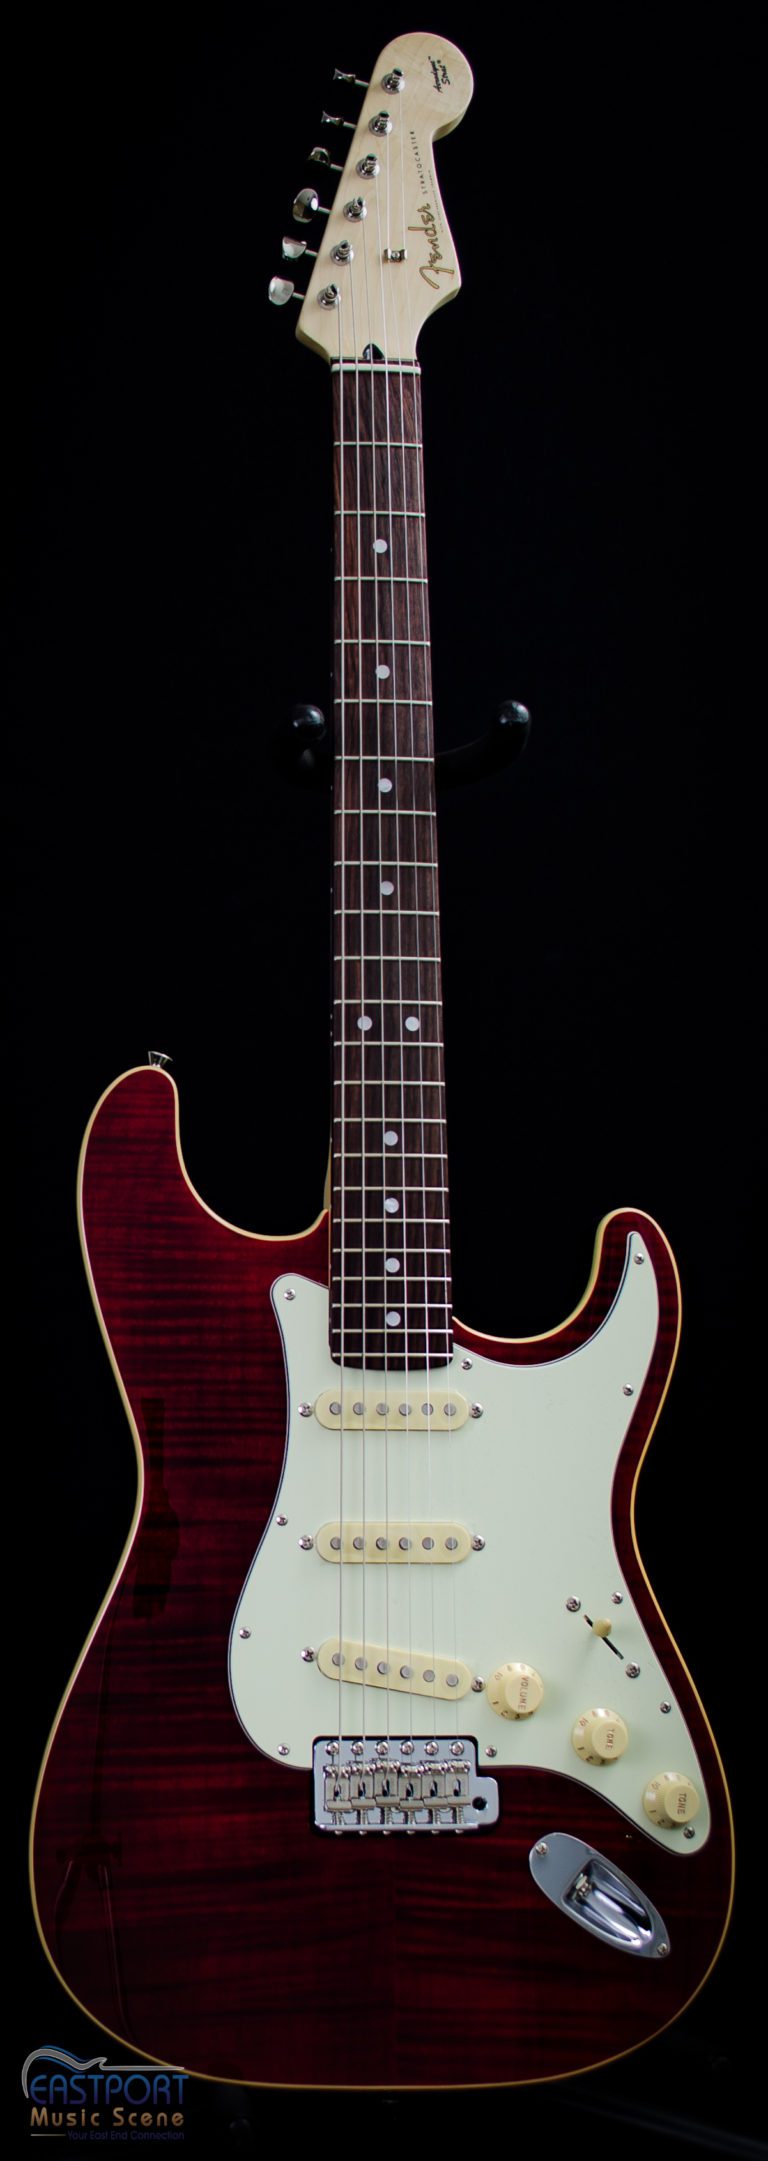 A red electric guitar with the strings missing.